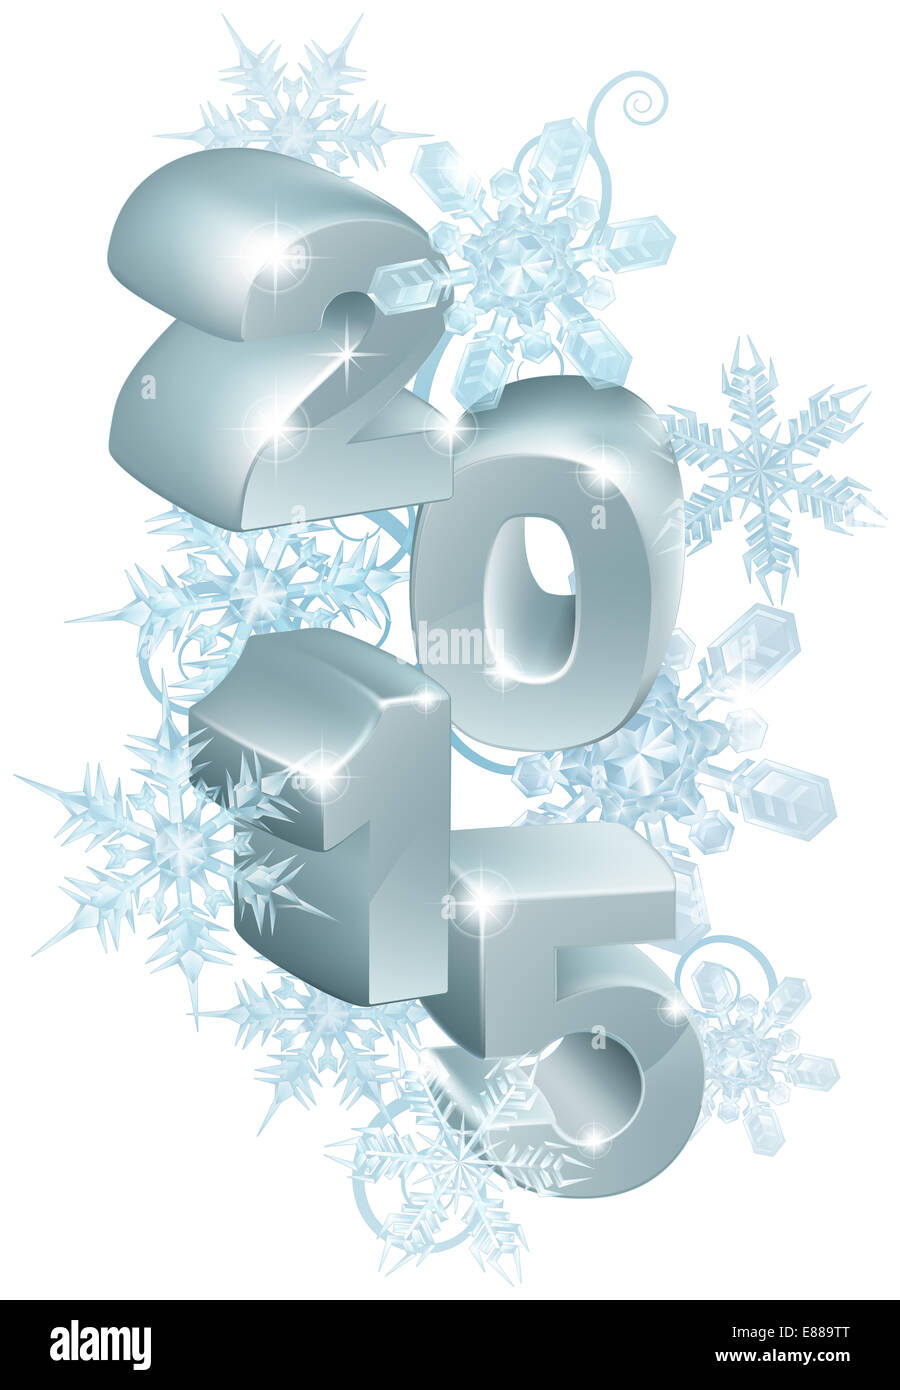 2015 New Year or Christmas decorations reading 2015 with snowflakes design element Stock Photo